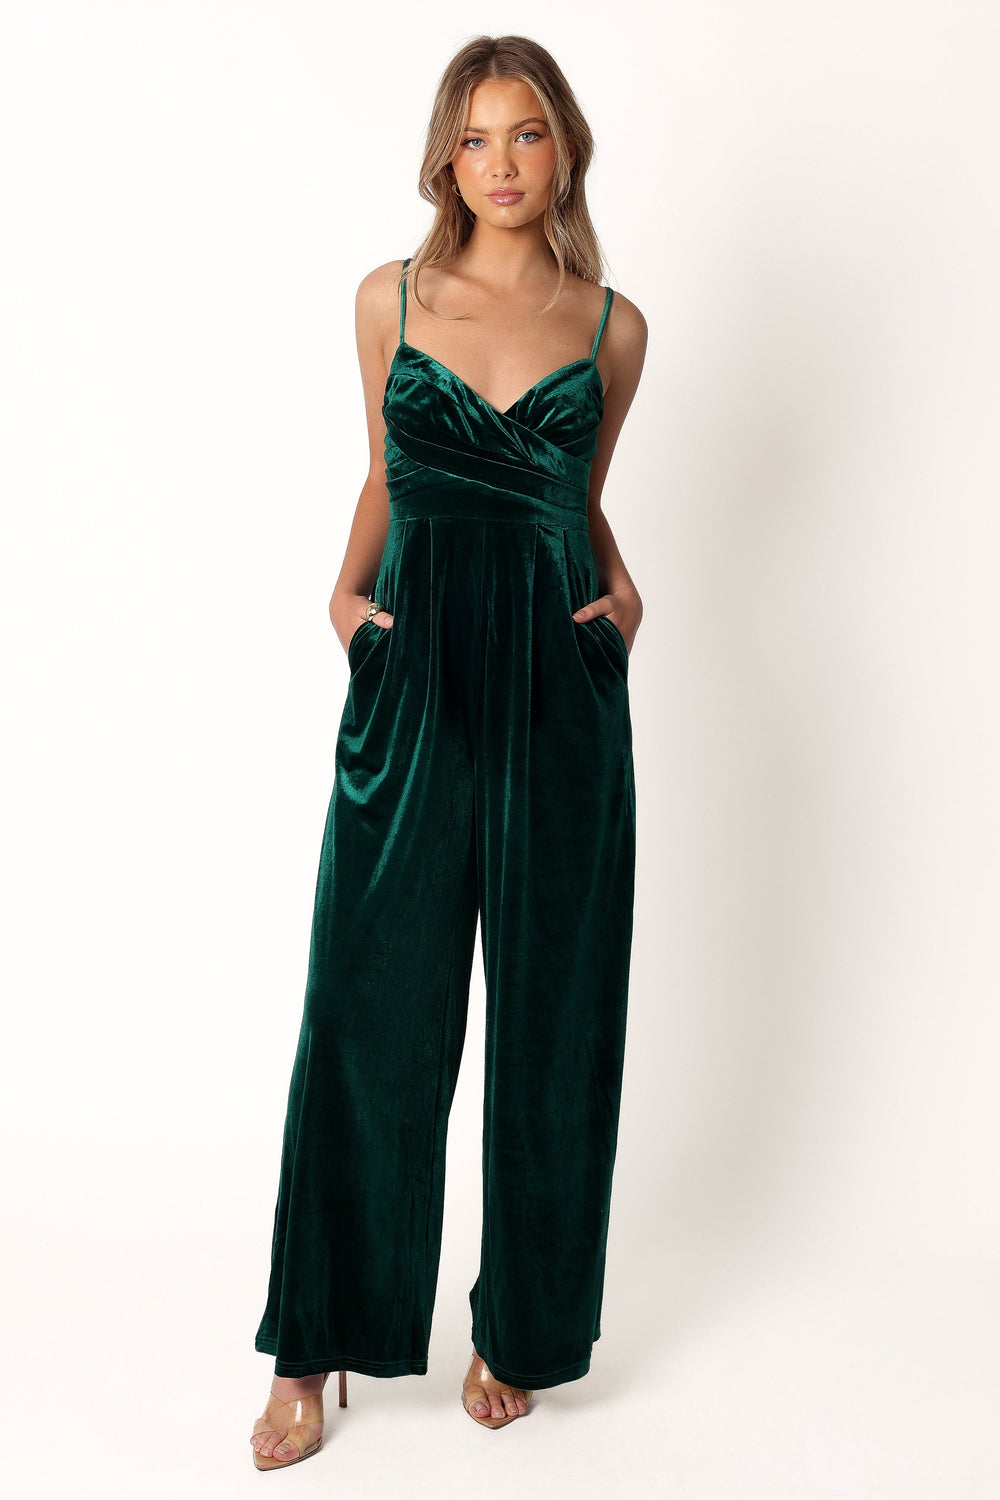 Petal and Pup USA Rompers Quinnie Velvet Jumpsuit - Emerald